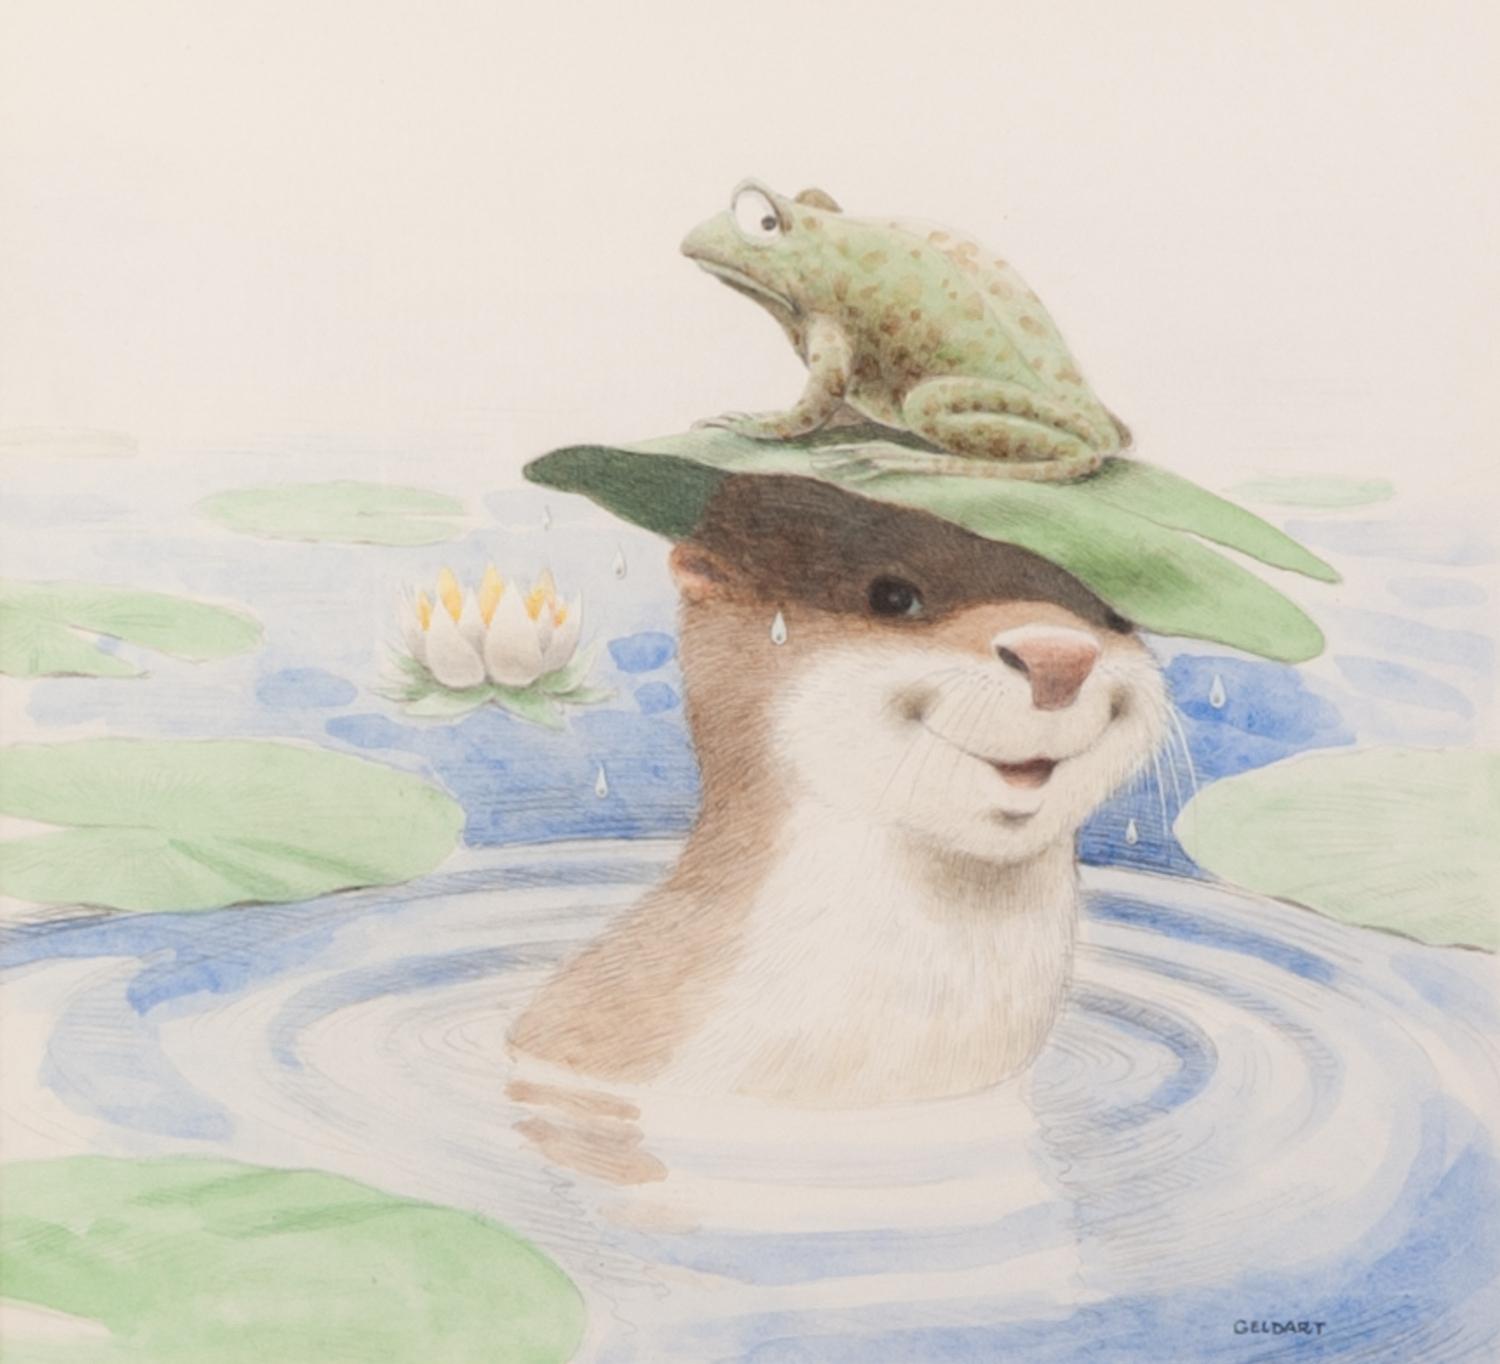 WILLIAM GELDART PENCIL AND WATERCOLOUR DRAWING A humorous study of an otter with a frog upon a